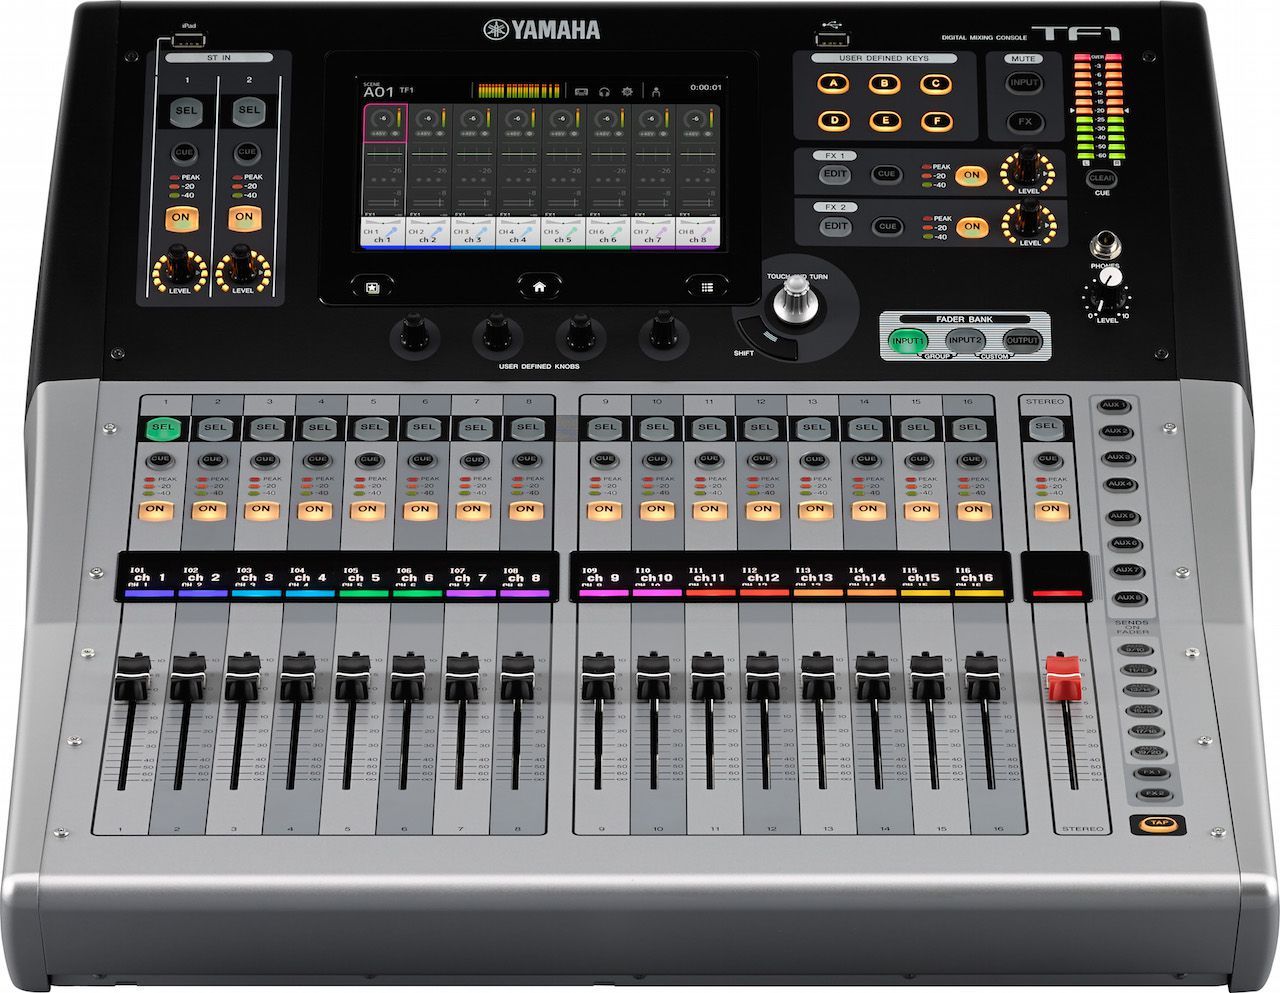 The Yamaha TF1 Digital Mixing Console at Hollywood Sound Systems